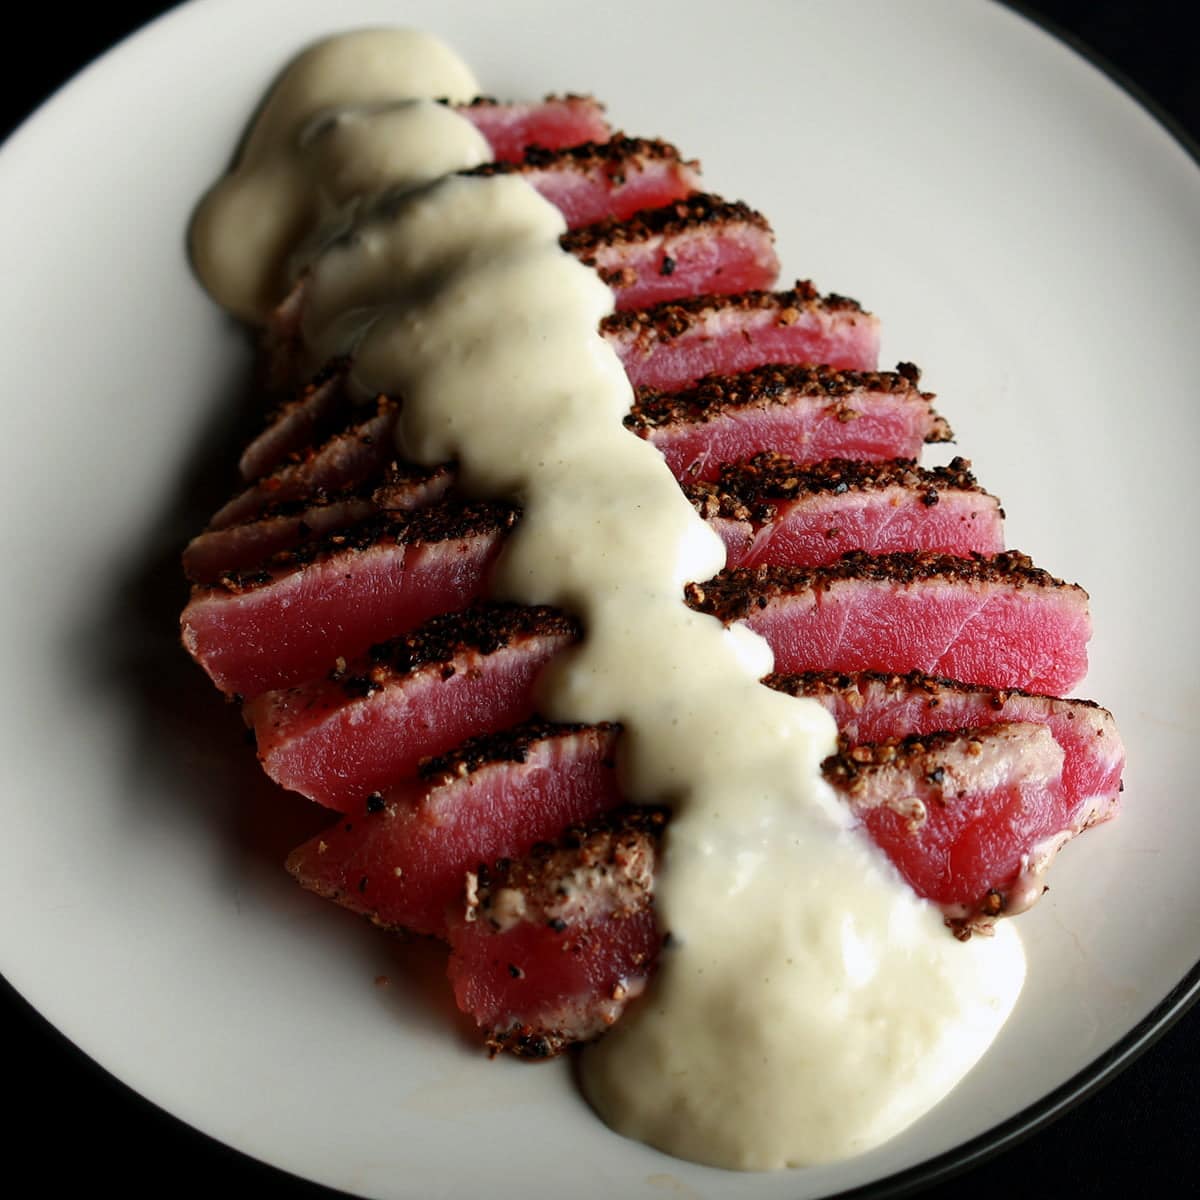 A pepper crusted tuna steak - rare - that has been sliced up, fanned out on a small white plate, and drizzled with wasabi cream sauce.